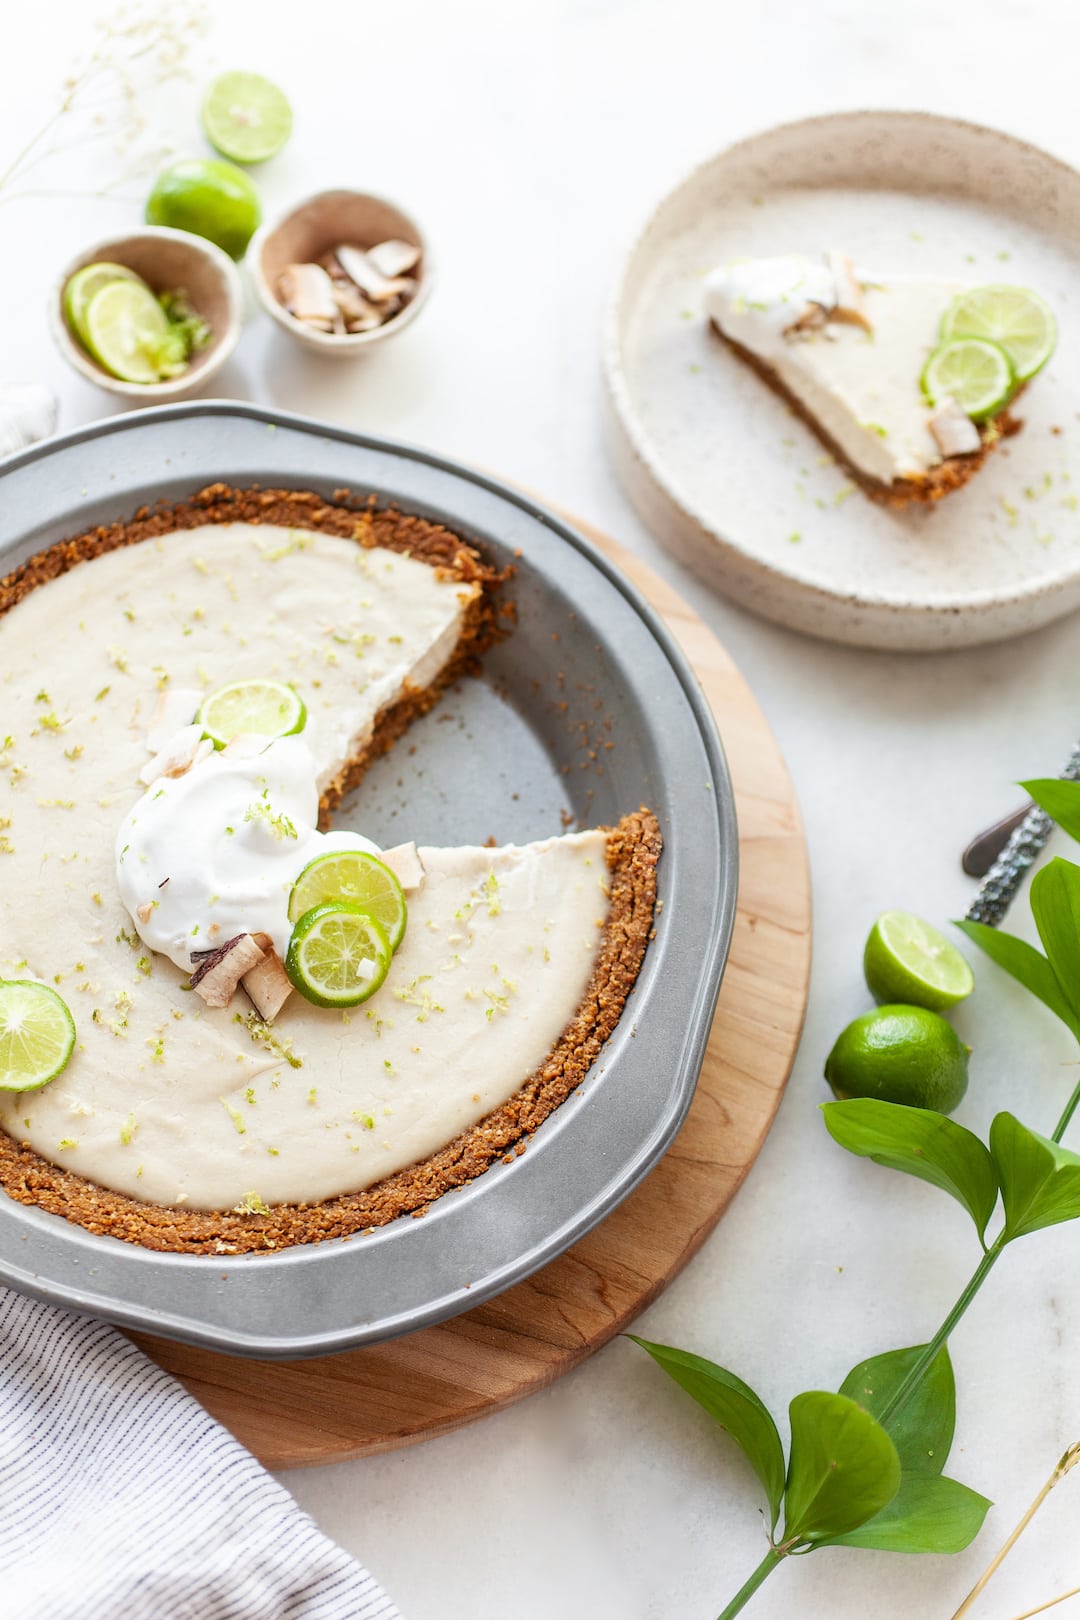 Vegan Key Lime Pie on a wood board with a slice taken out and the slice on a plate beside the pie